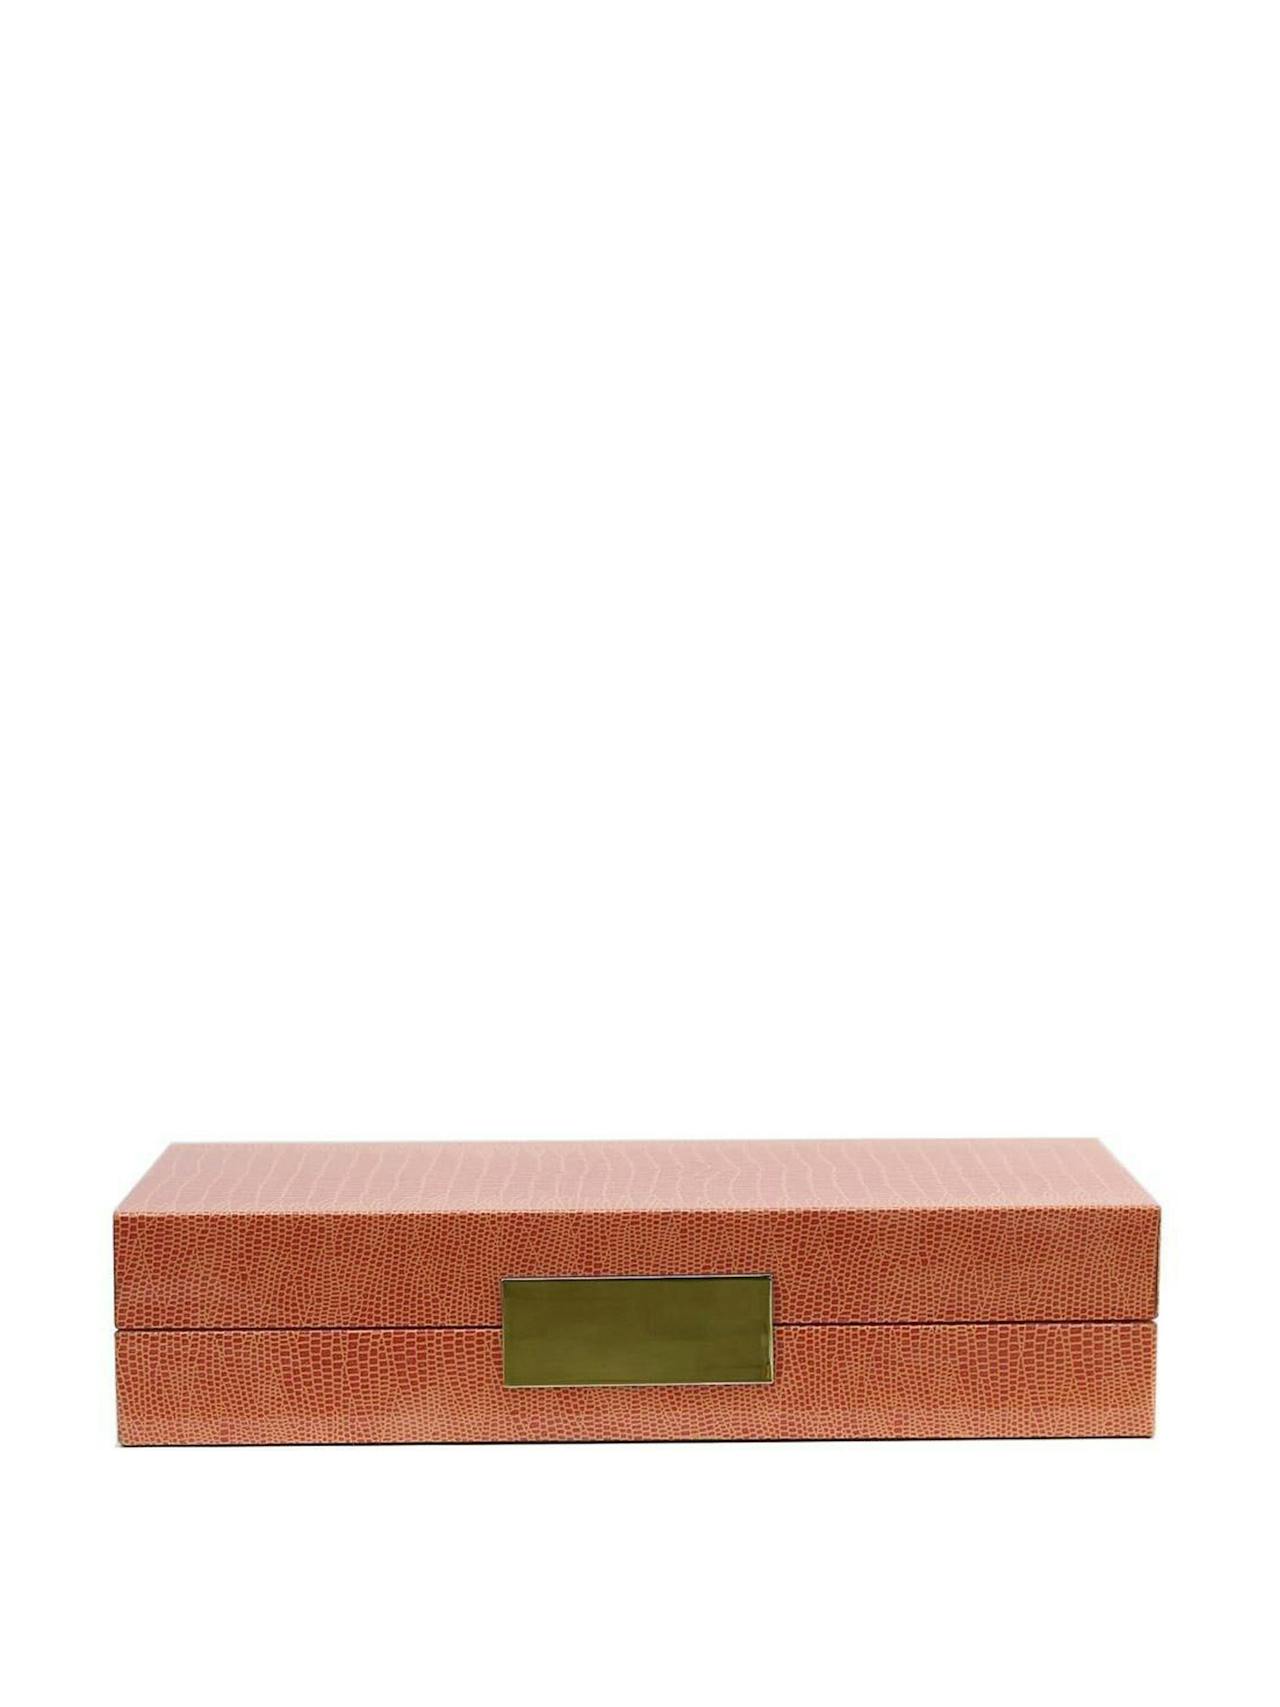 Beautiful high gloss lacquered orange croc small box by Addison Ross. Features a gold plated clasp and matching hinges and lined in cream suede | Collagerie.com